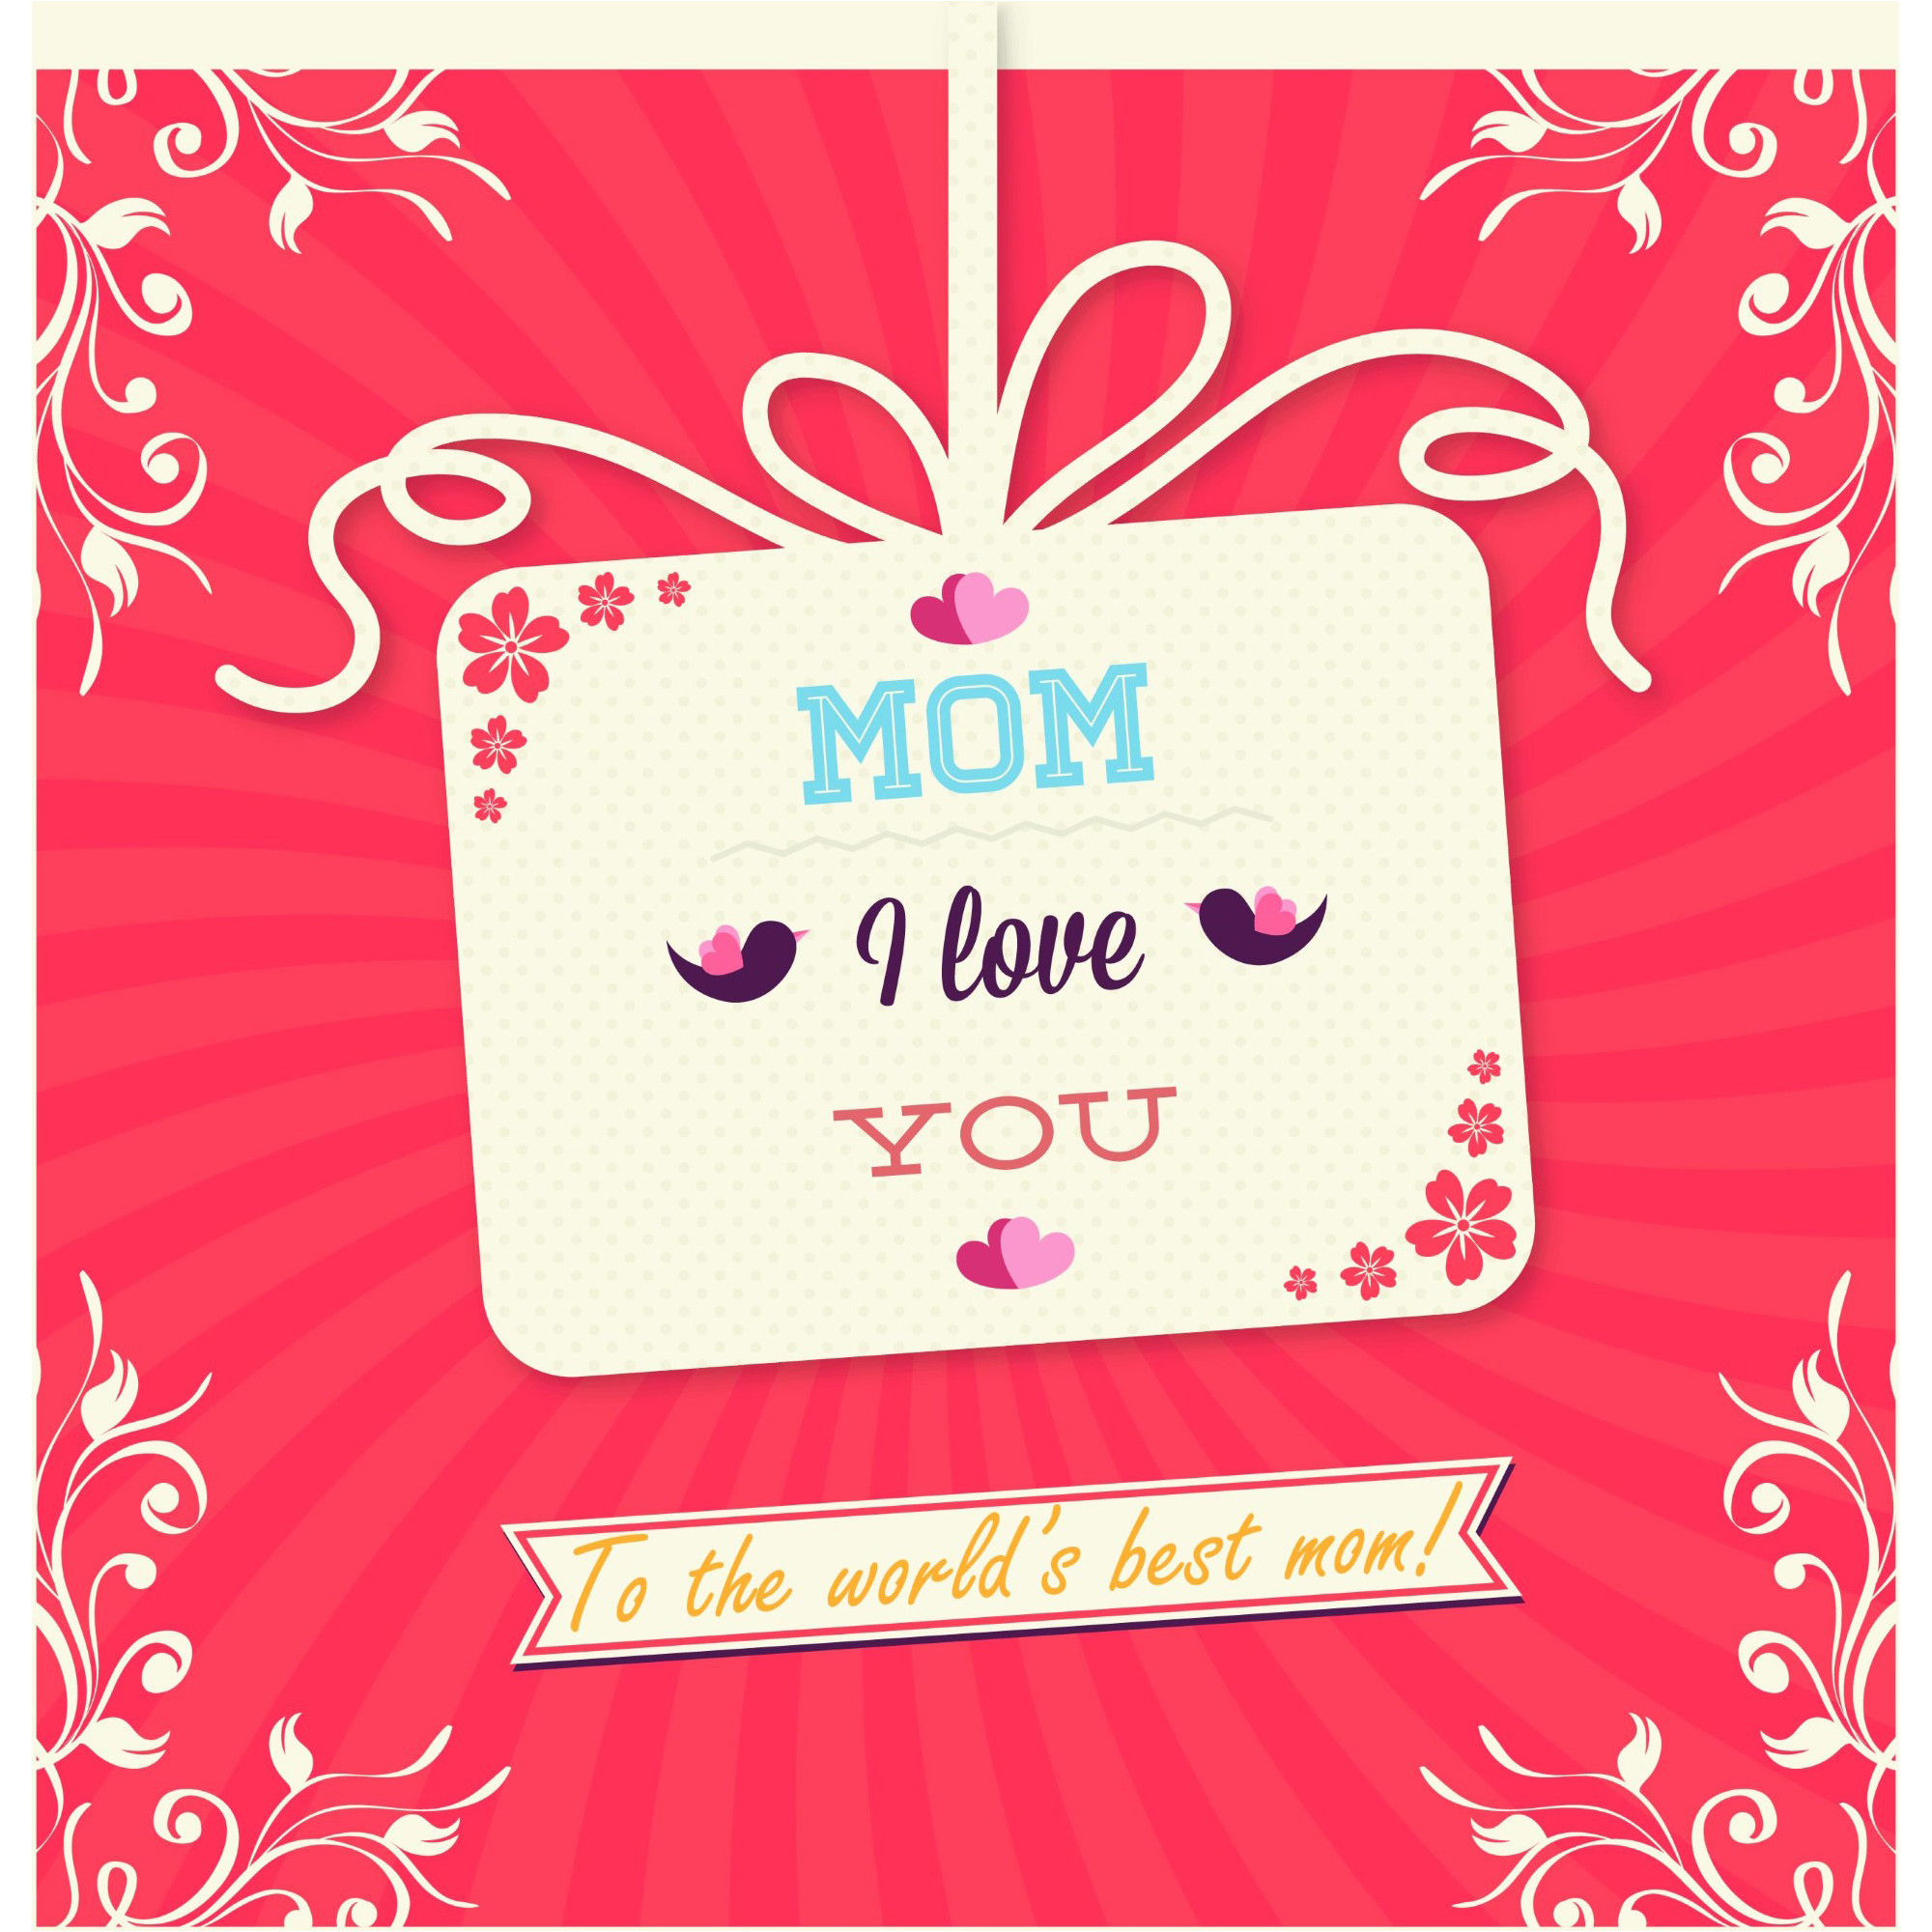 2000x2000 Are you looking for Mother Day greeting card Vector Background. We have  combined 604 Mother's Day vector party background for Crafts and  Decorations.